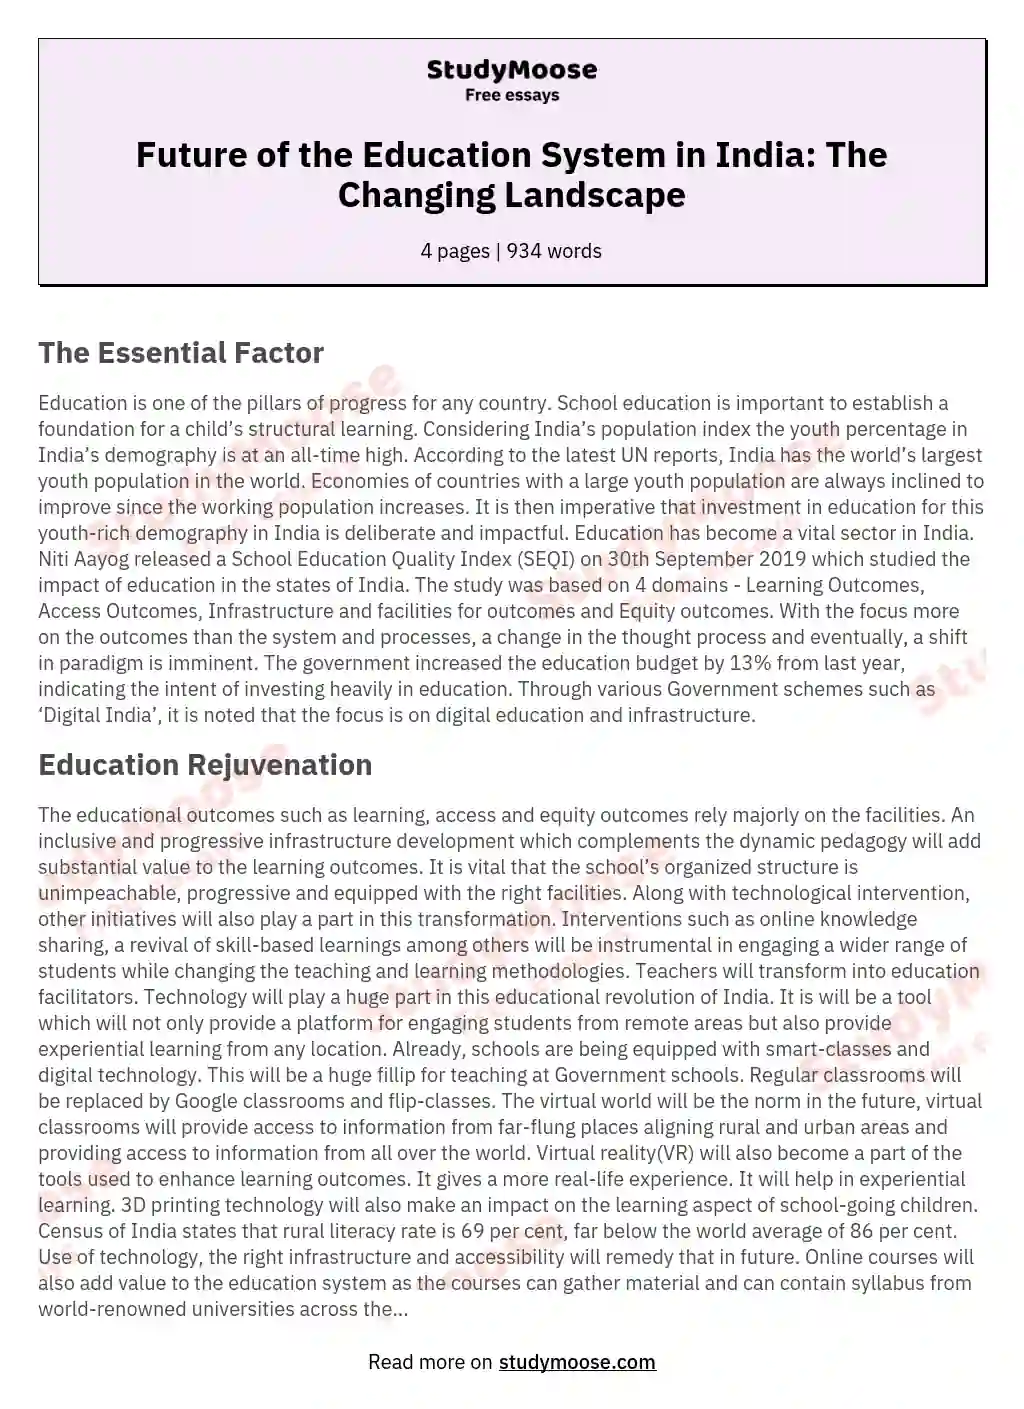 essay on new education system